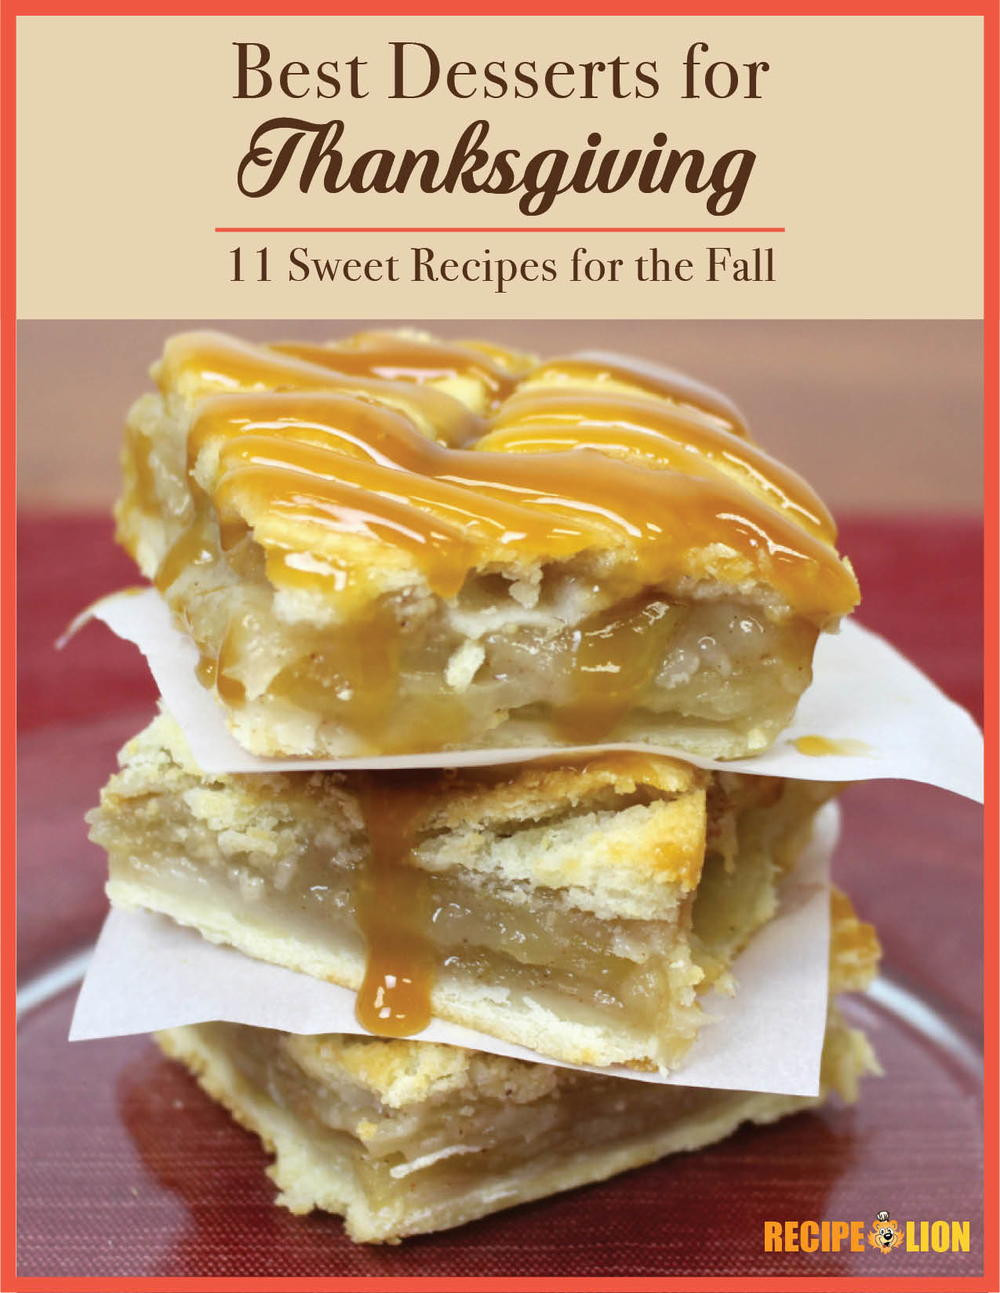 Quick Fall Desserts
 "The Best Desserts for Thanksgiving 11 Sweet Recipes for